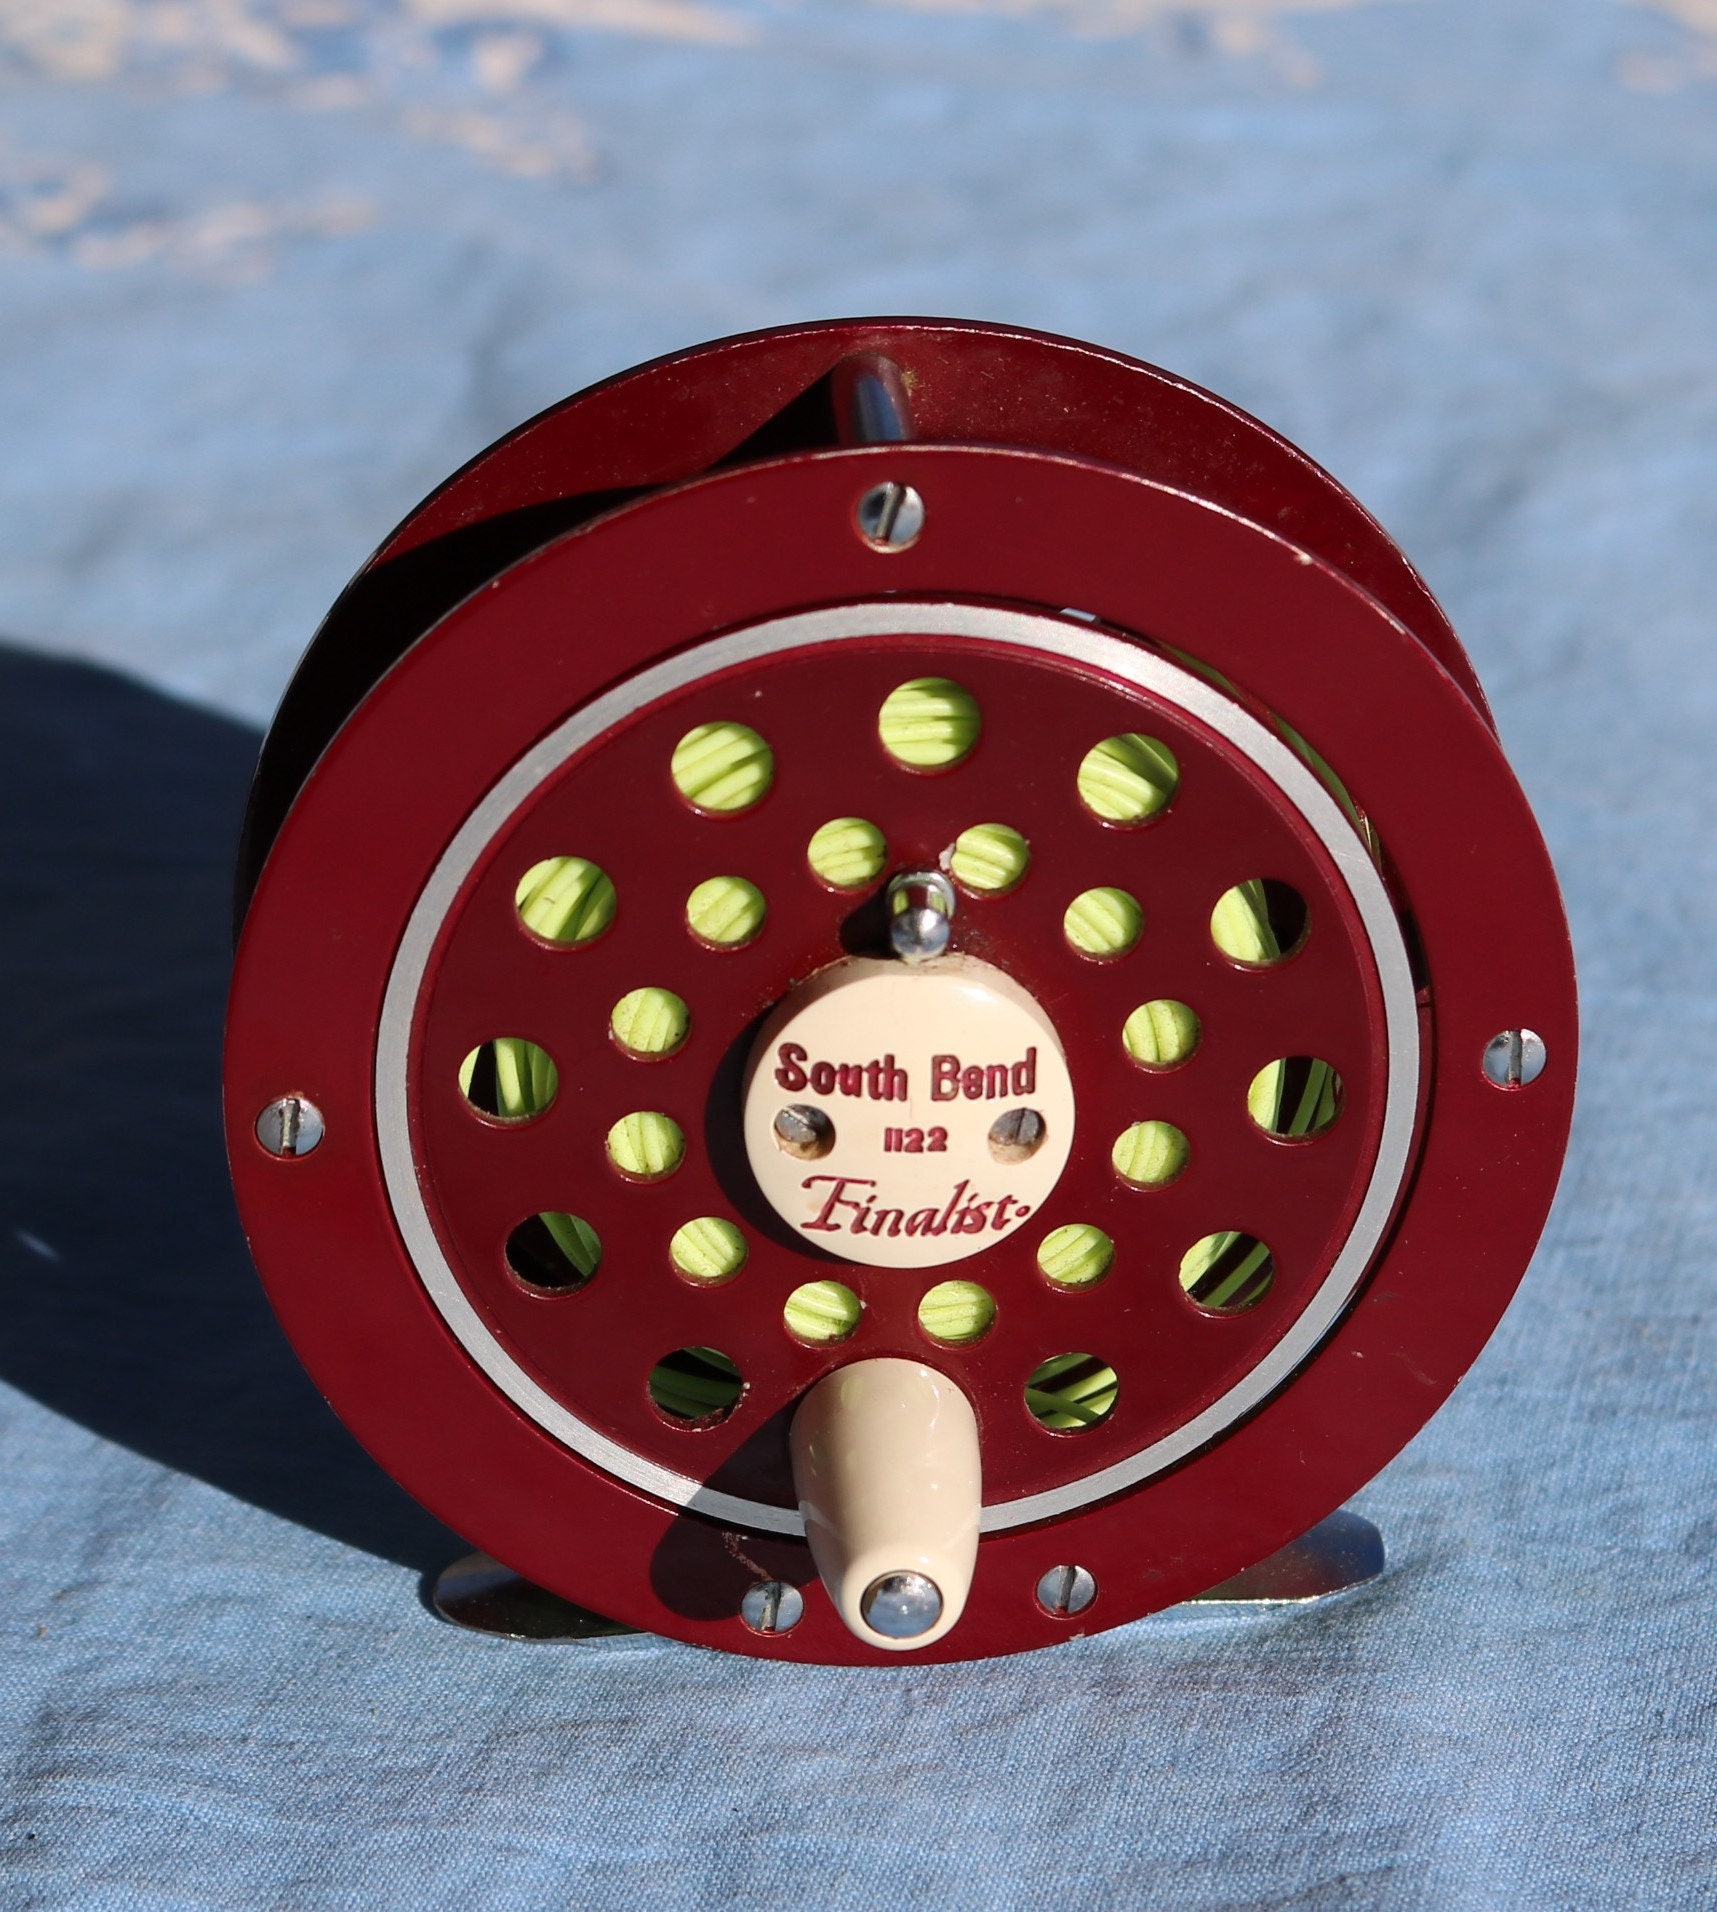 South Bend 1122finalist Fly Reel Complete With Almost New 4/5 Wt. Line  Original Box and Paperwork Made in Japan Reel Seat/clip MODAFIED 